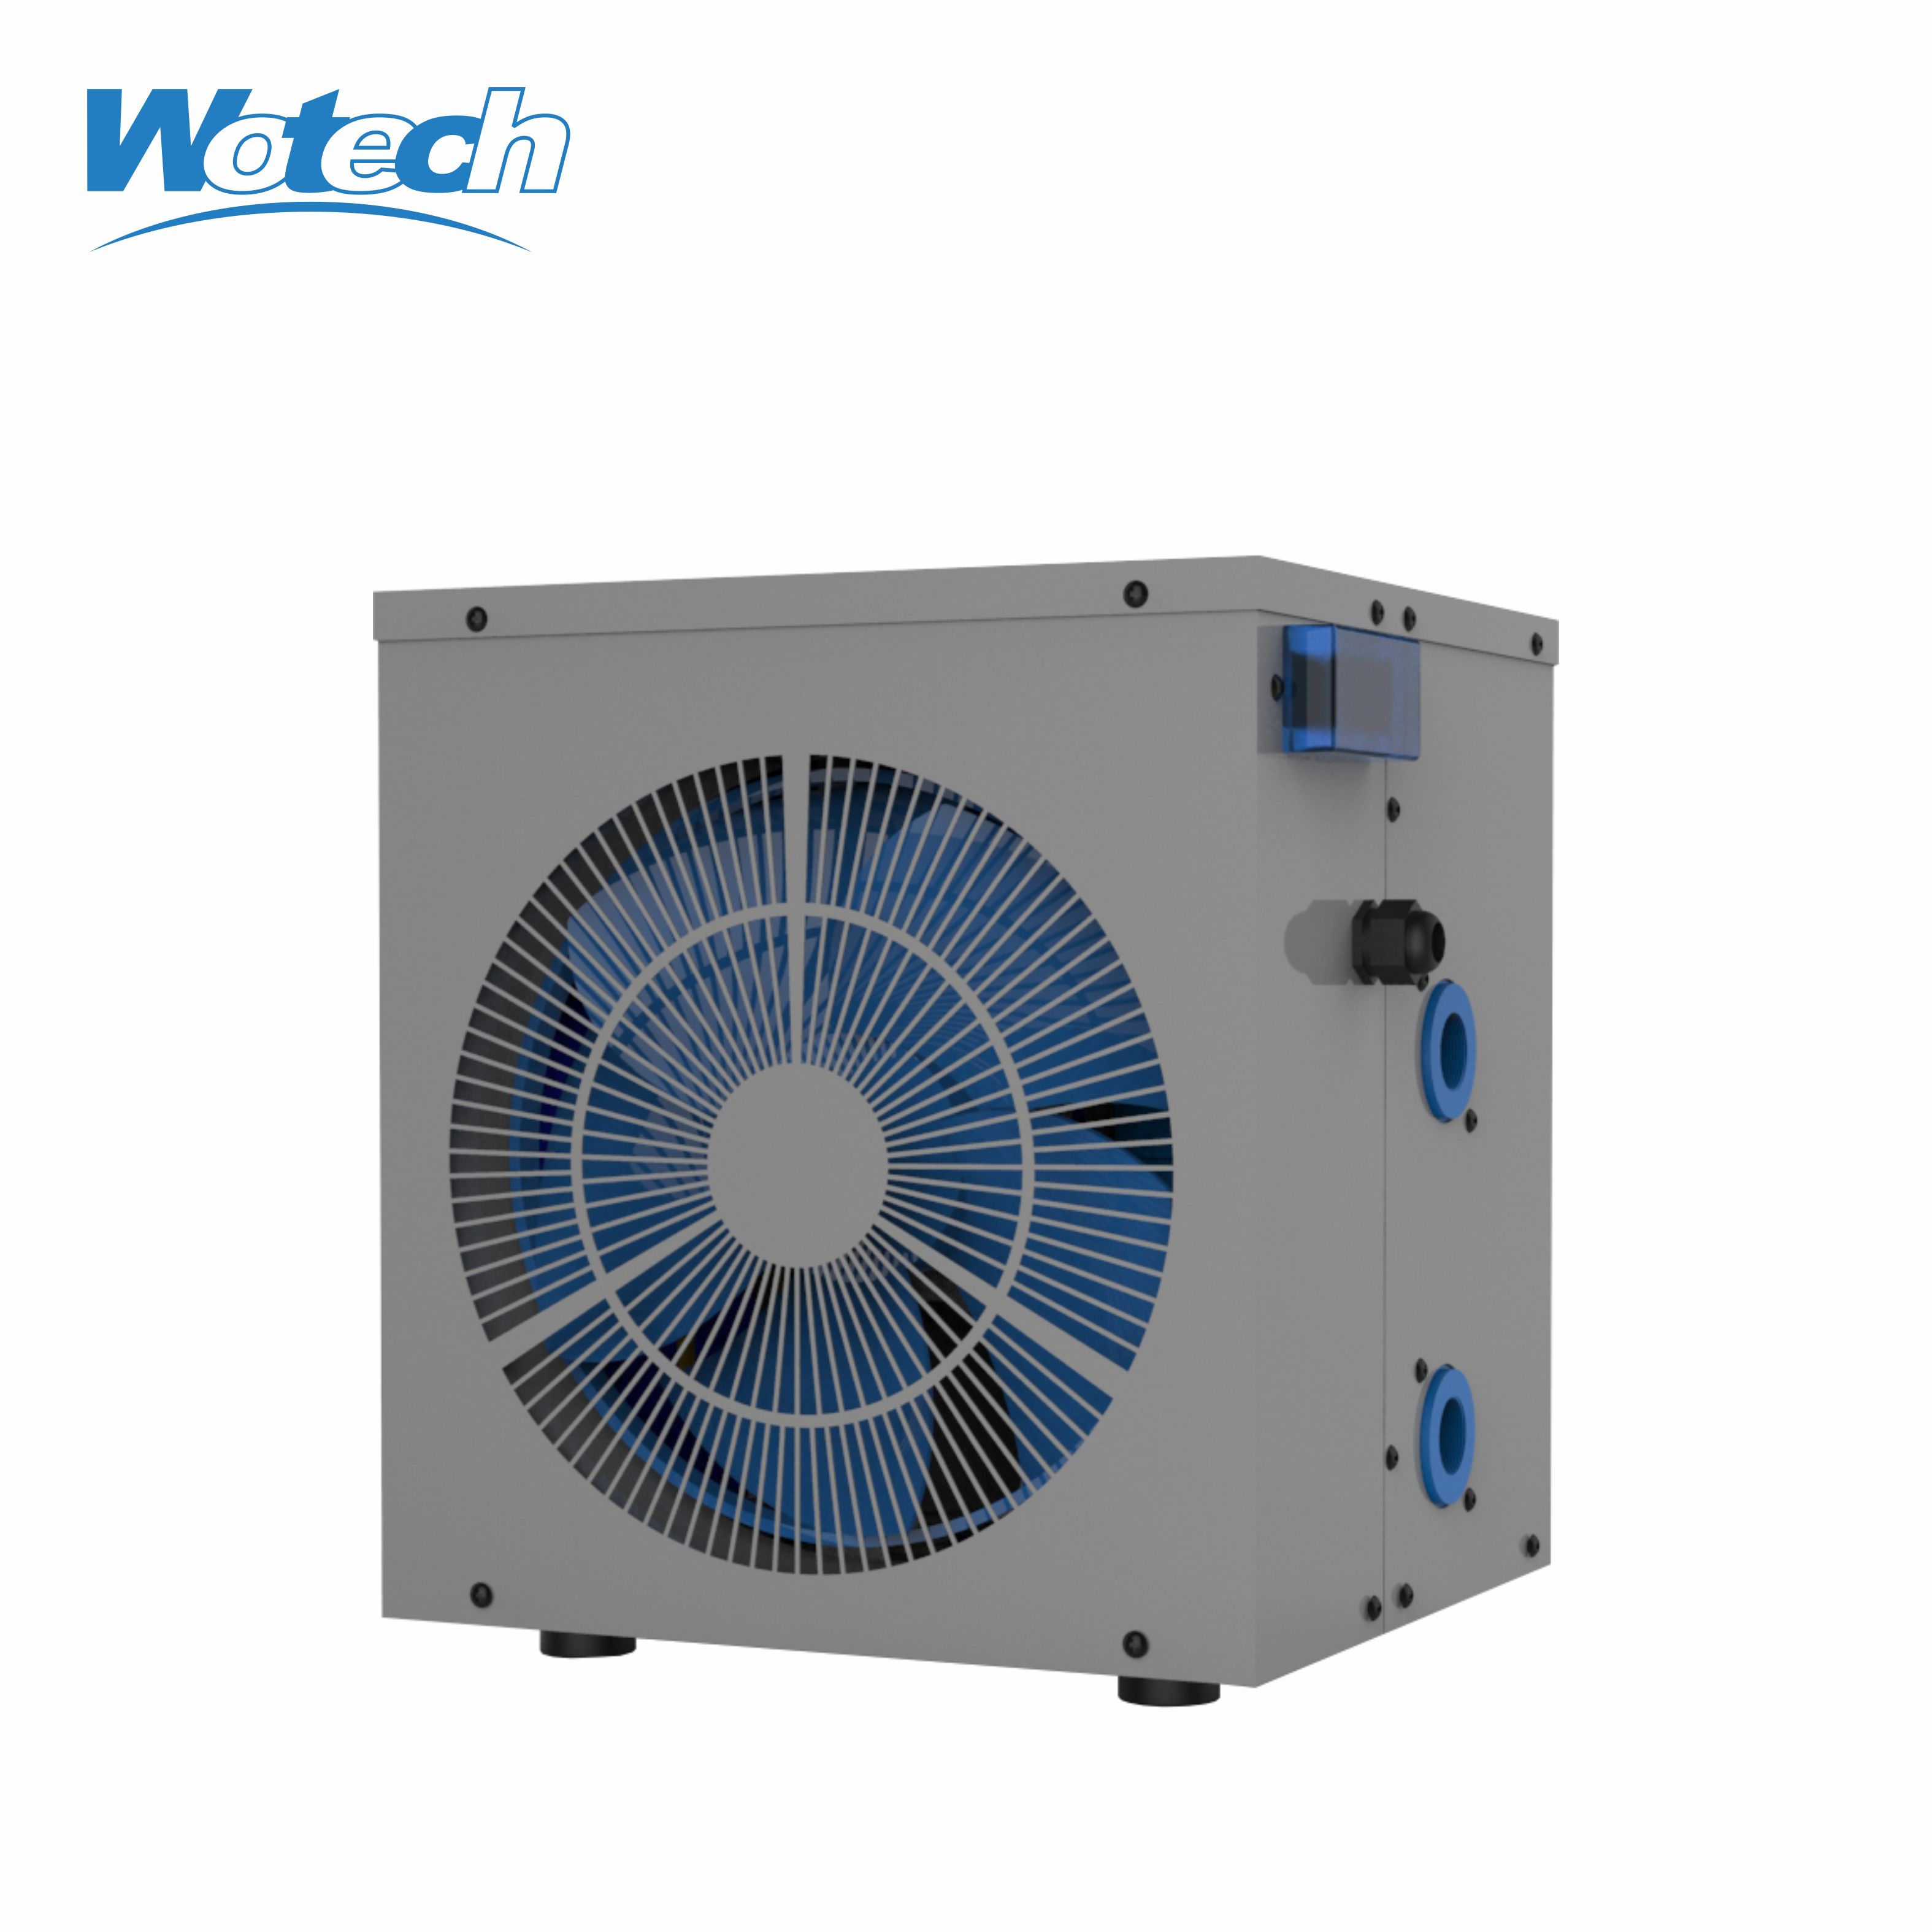 Small-Sized Swimming Pool Heat Pump for Child